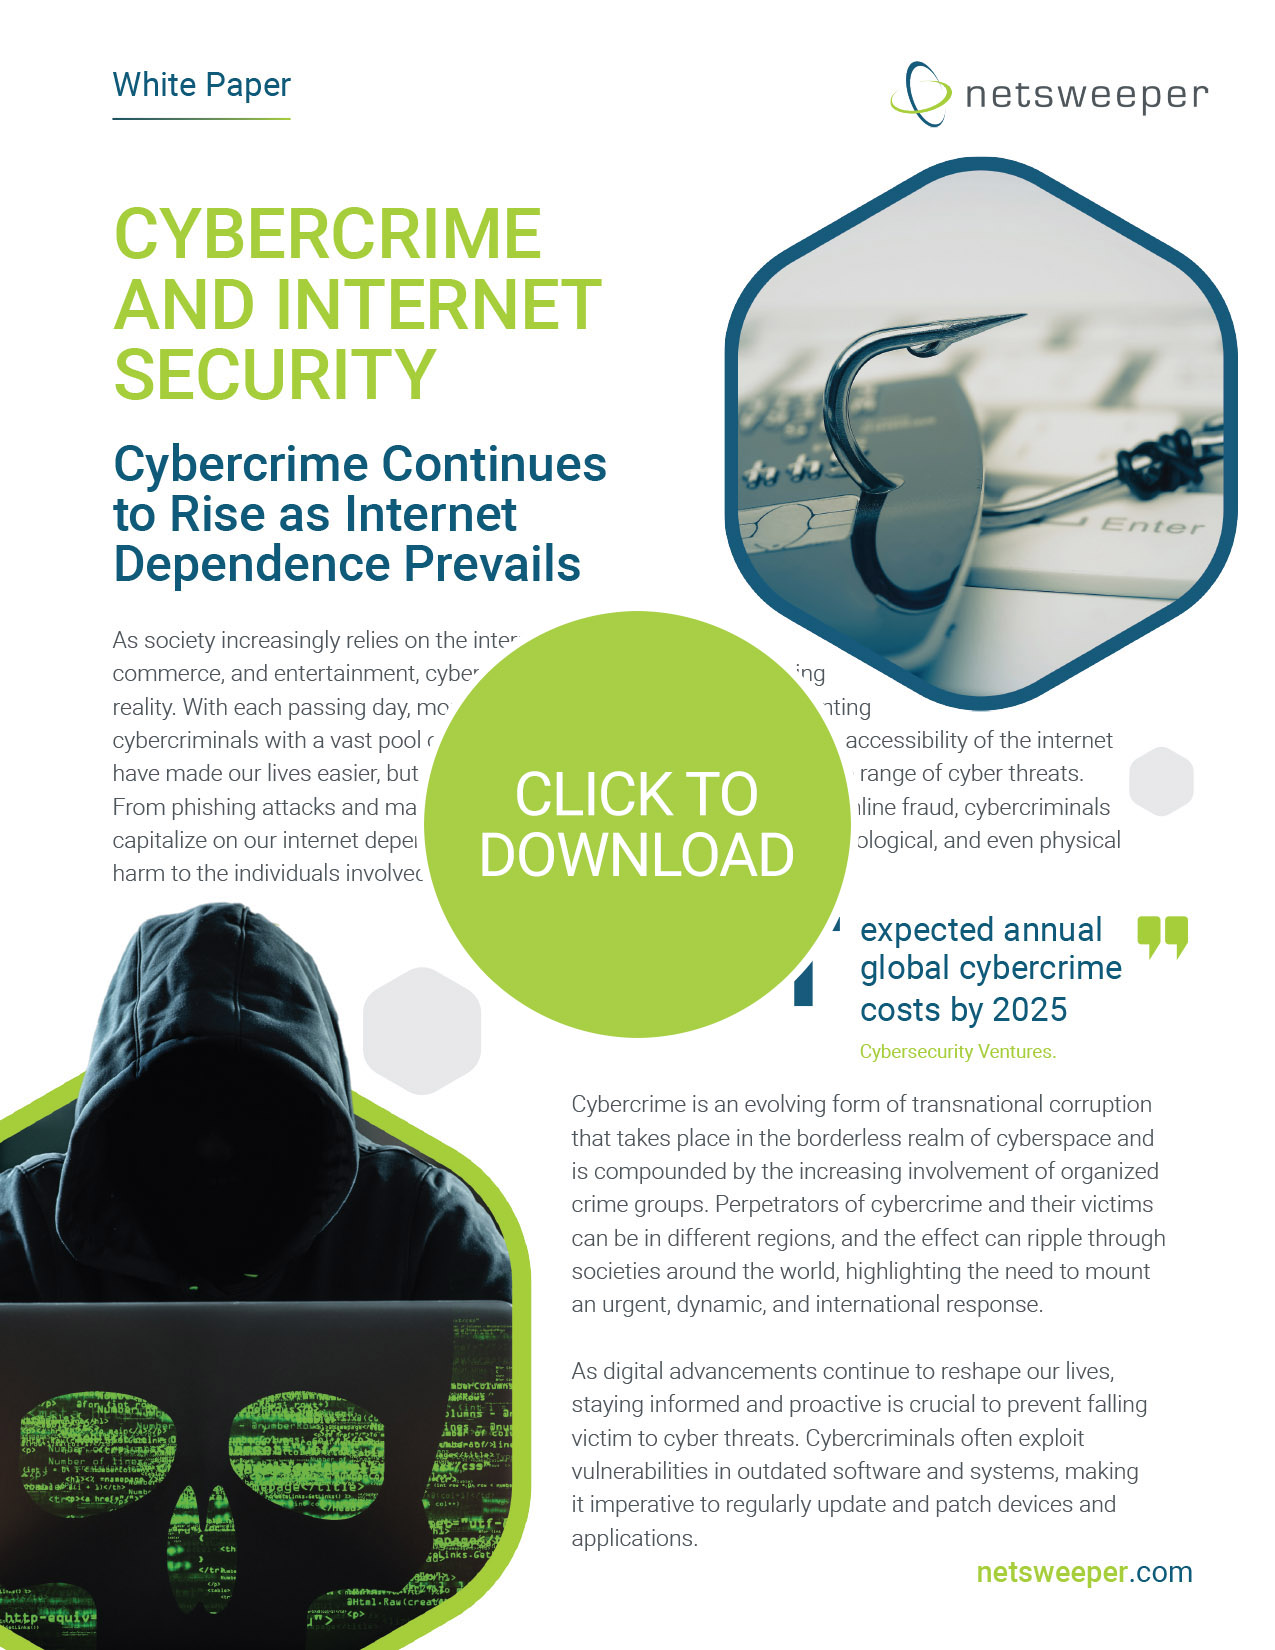 White Paper: Cybercrime and Internet Security